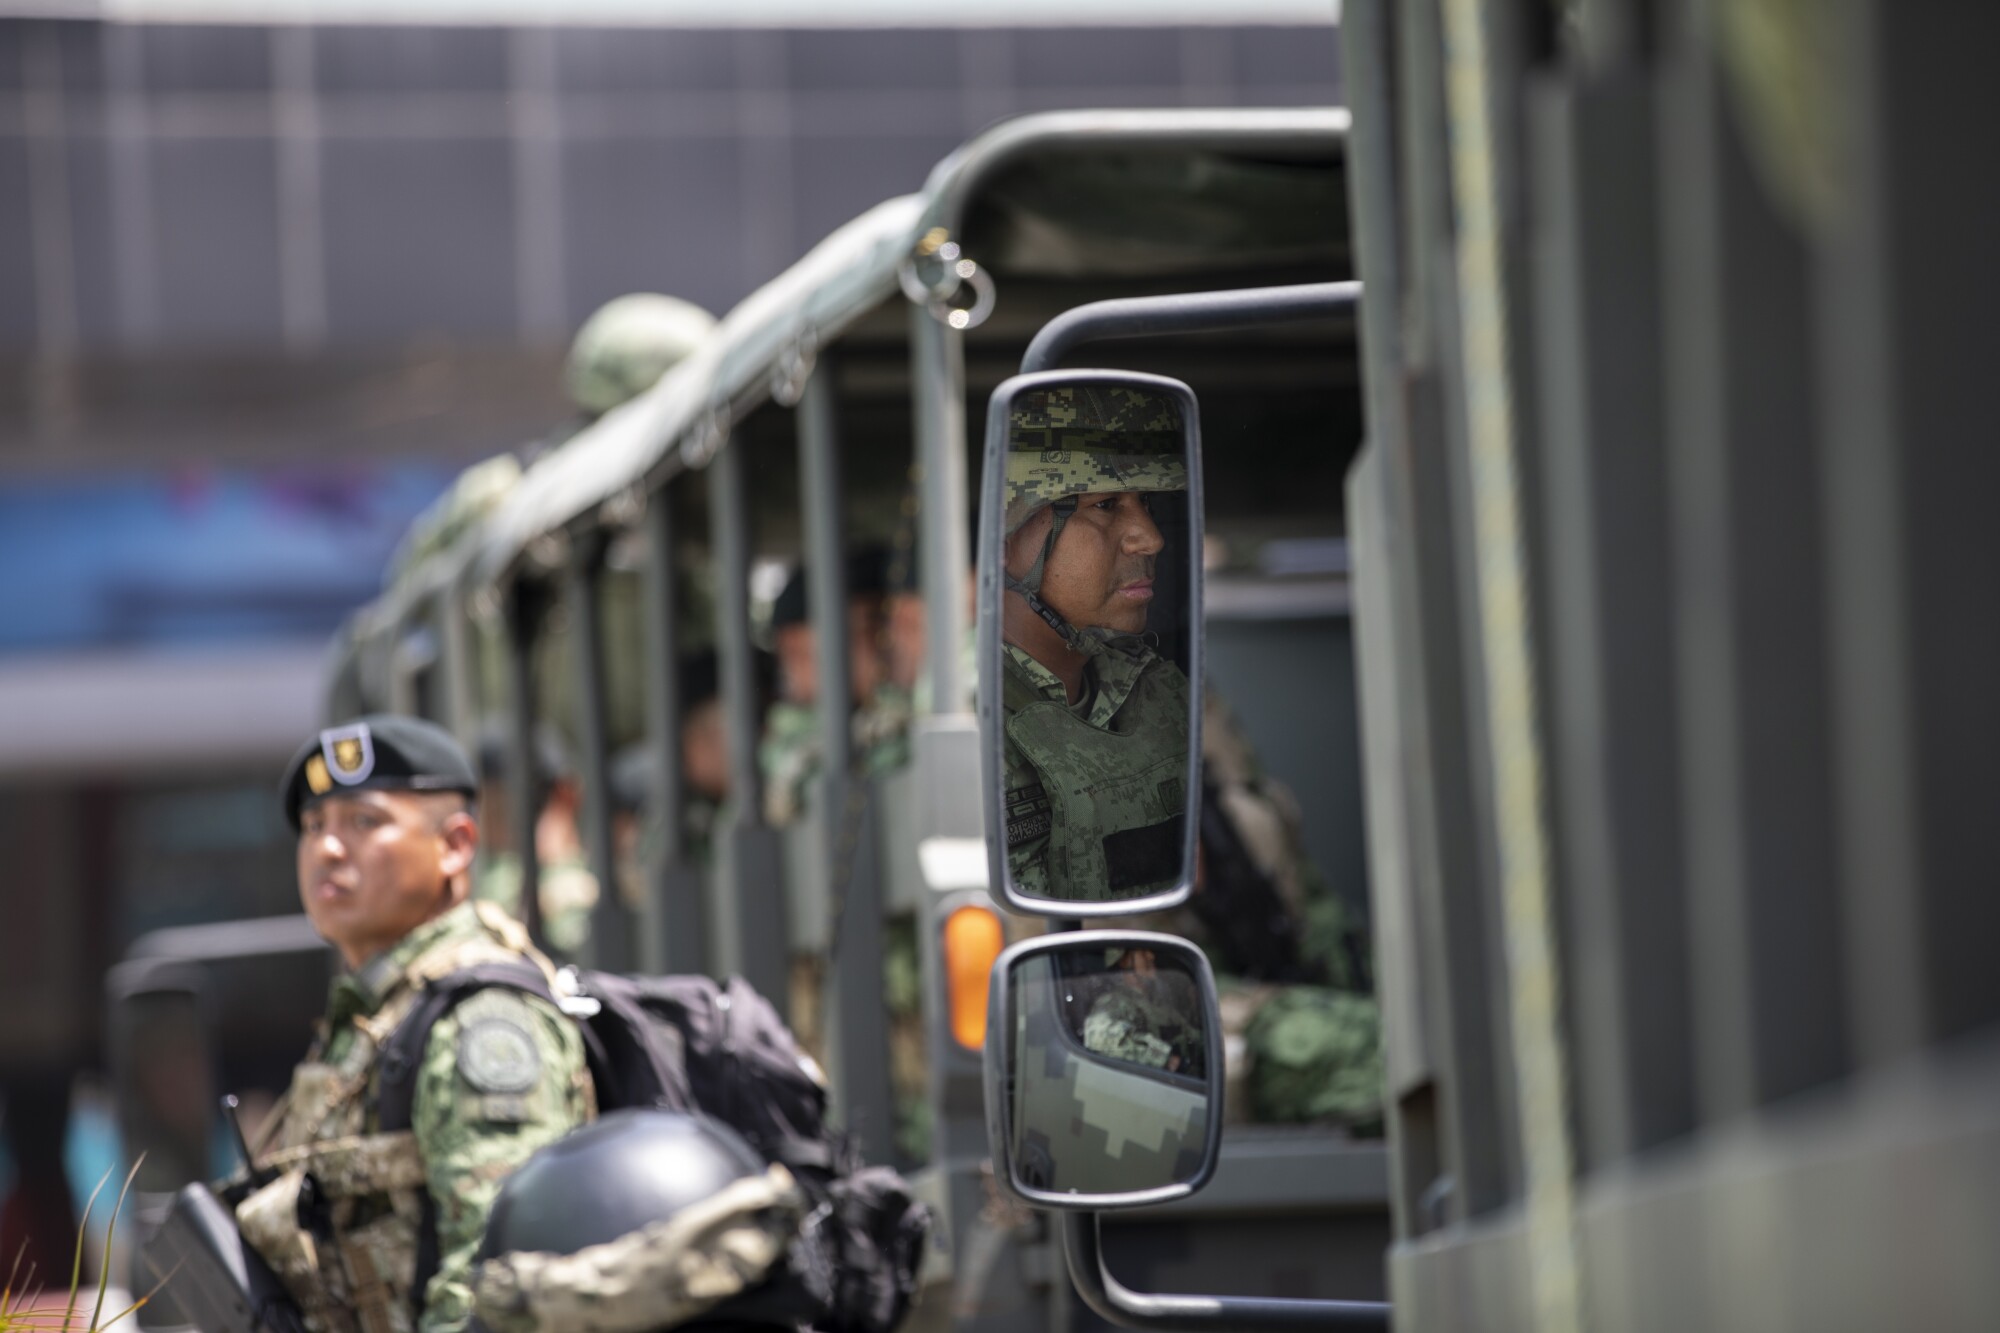 More than 300 special forces from the Mexican Secretariat of National Defense arrive in a vehicle